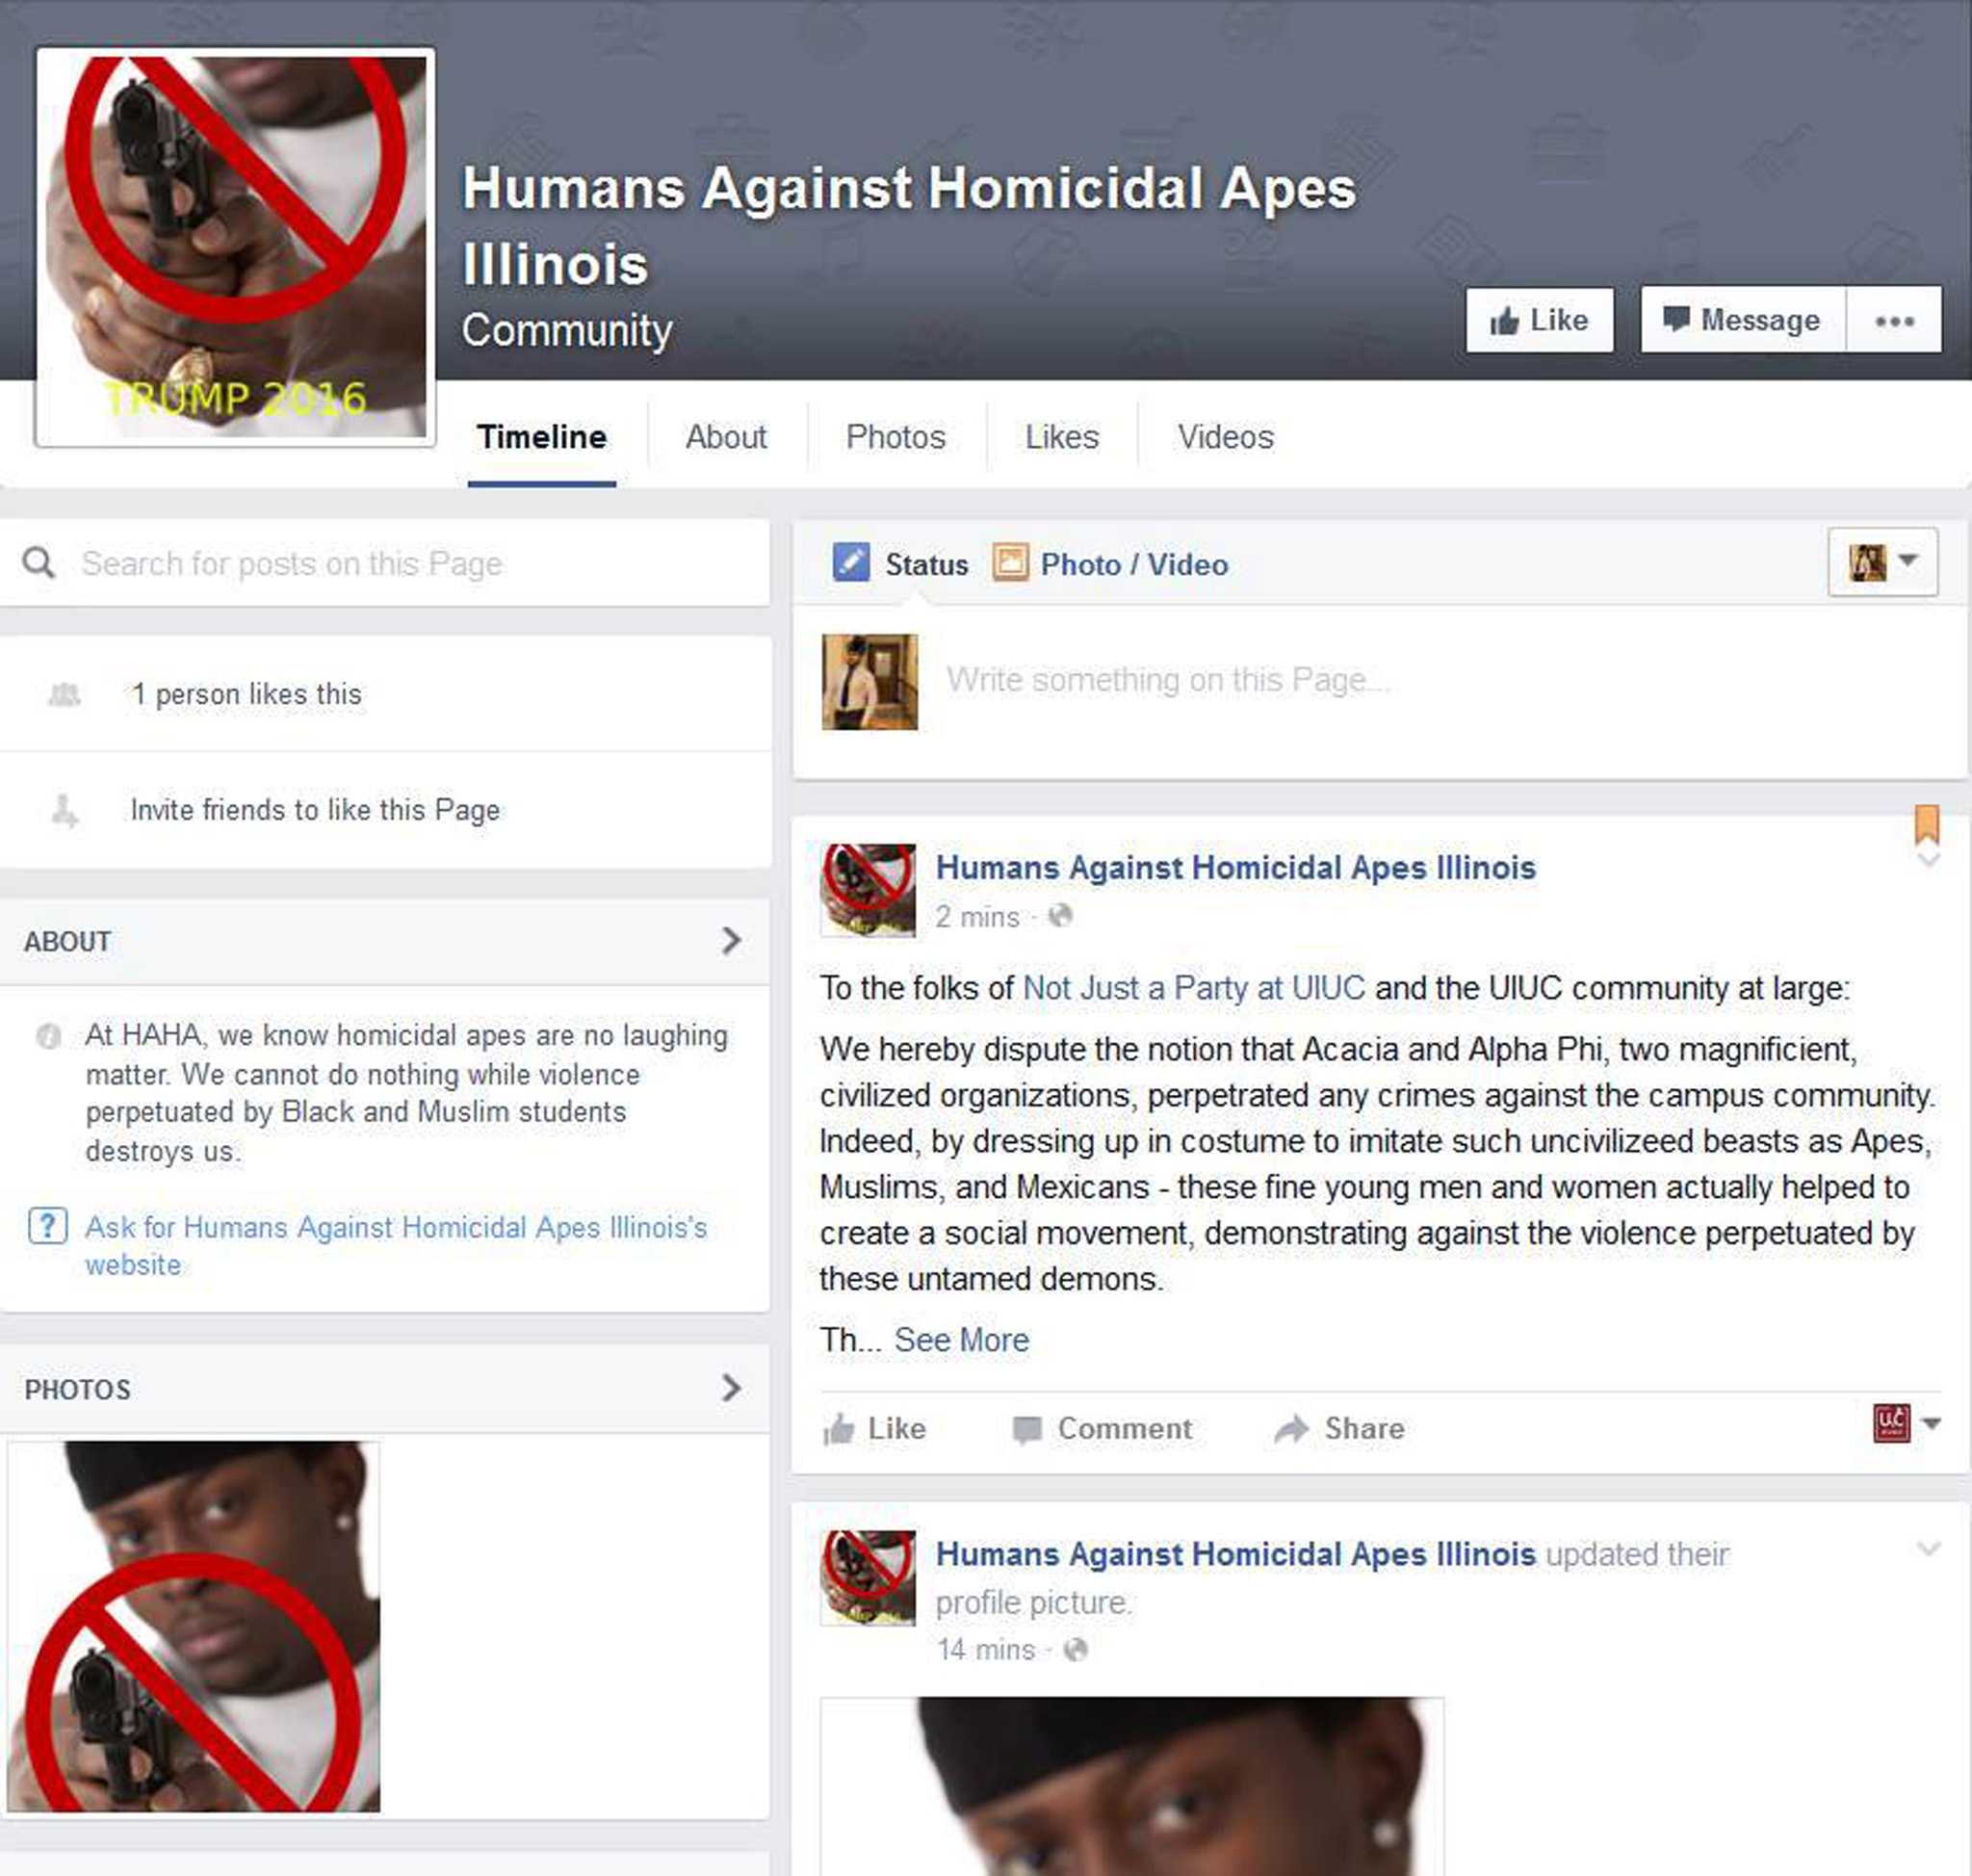 An+alleged+racist+photo+and+subsequent+Facebook+group+sparked+condemnation+from+student+activist+groups.%26nbsp%3B